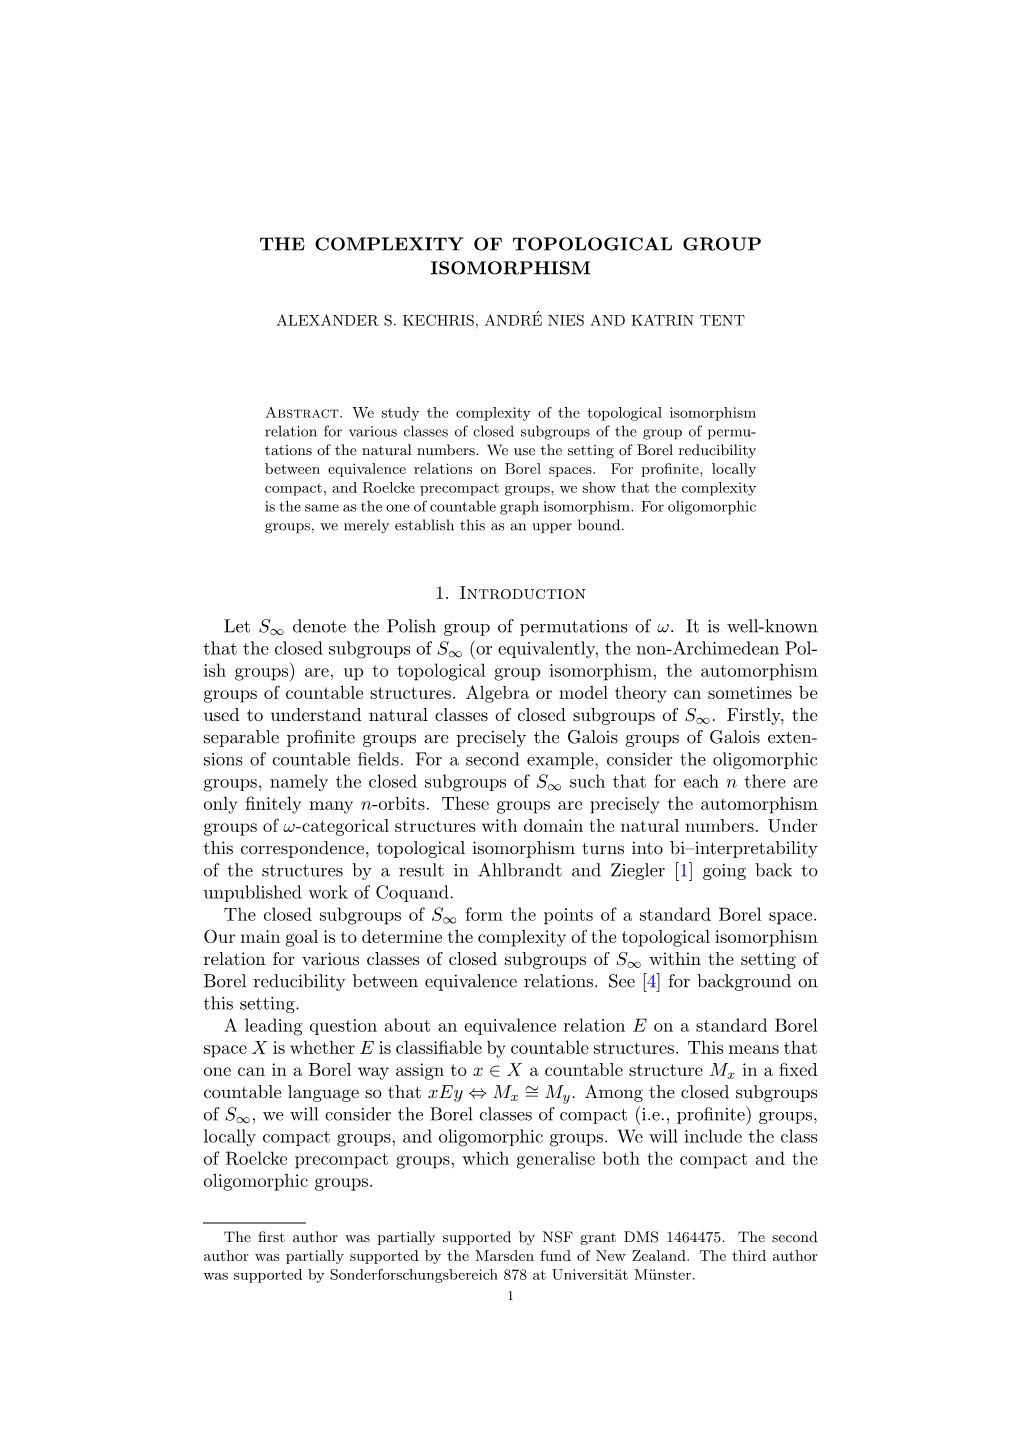 The Complexity of Topological Group Isomorphism